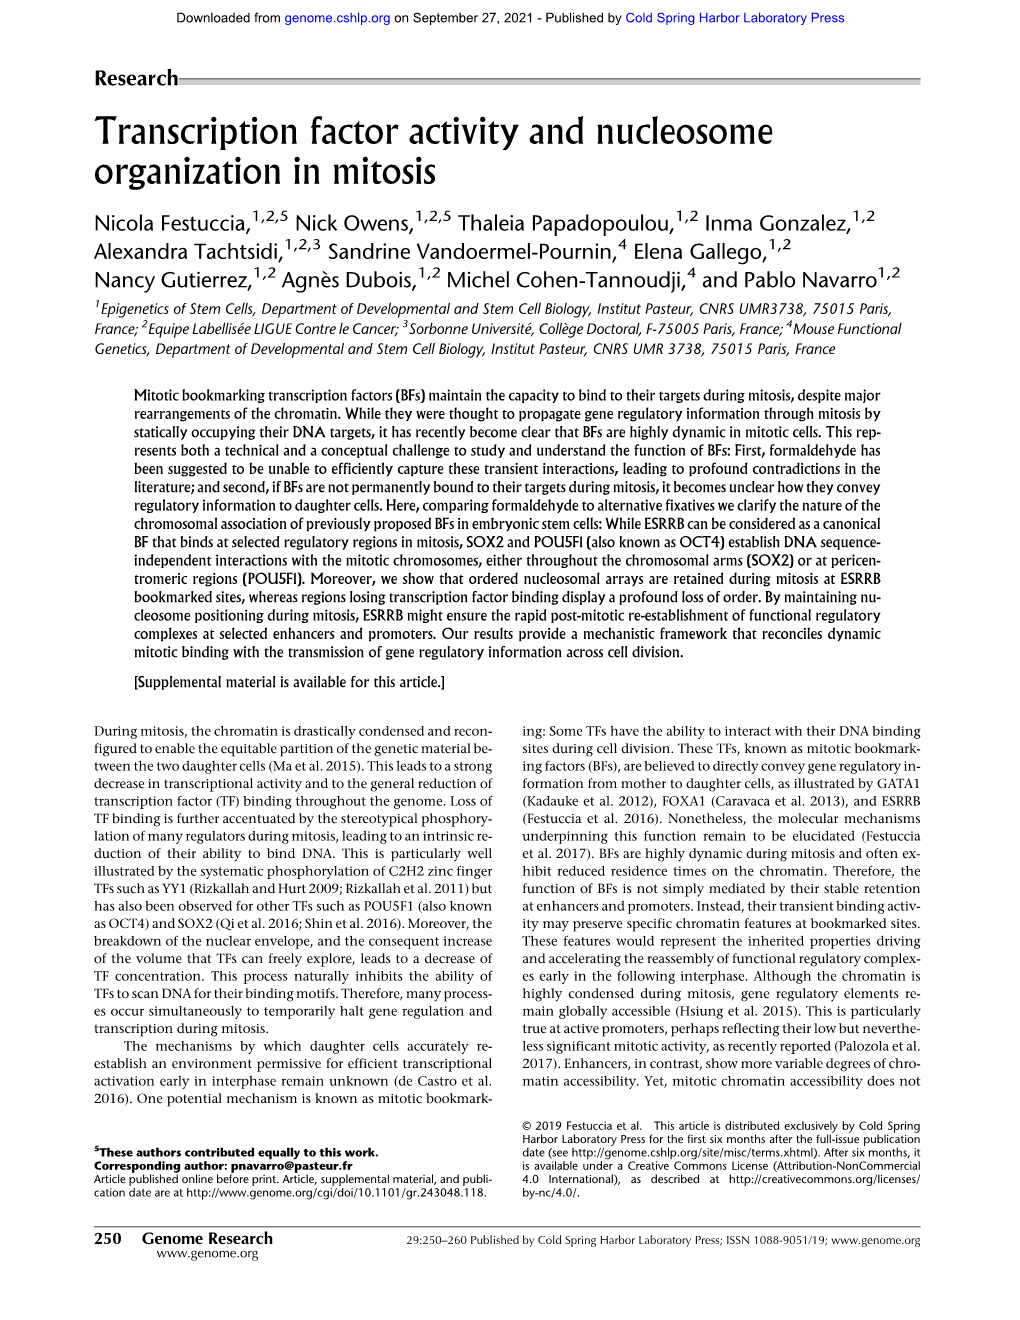 Transcription Factor Activity and Nucleosome Organization in Mitosis